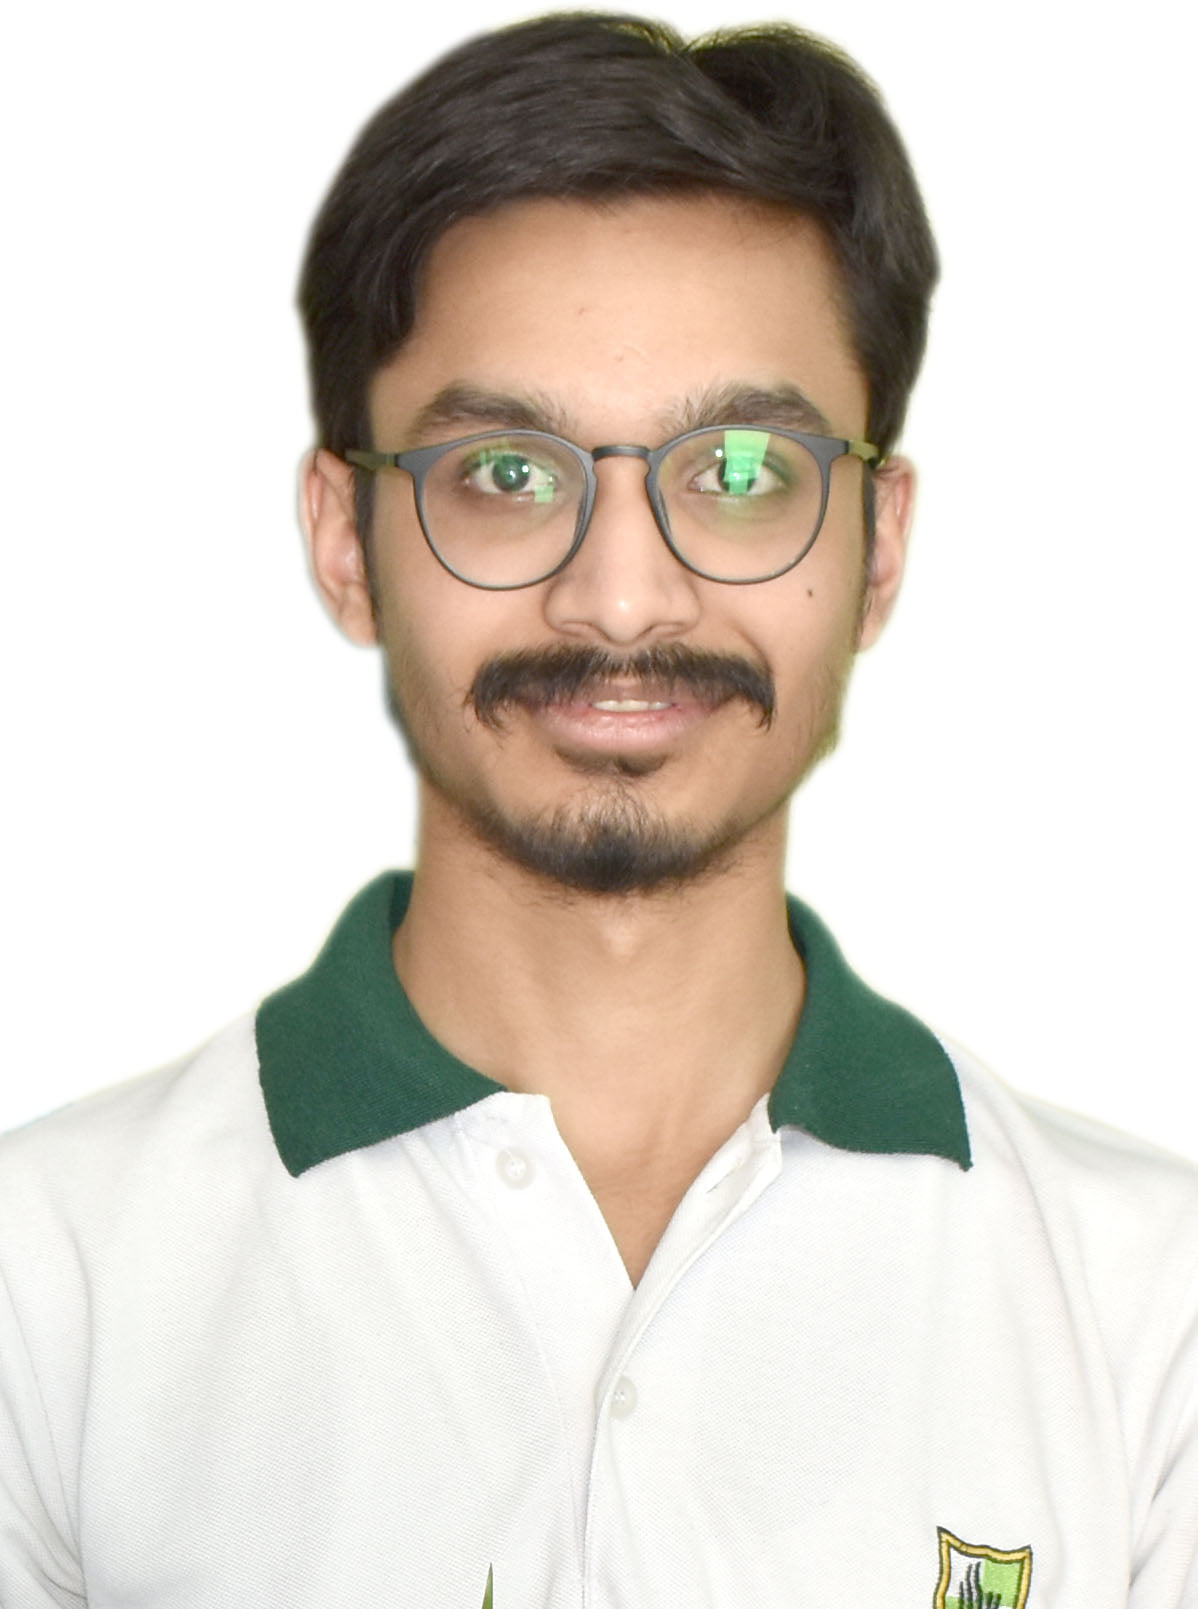 Tanish Gupta Seized 89th All India Rank and 3rd Position in Punjab in JEE Advance 2020